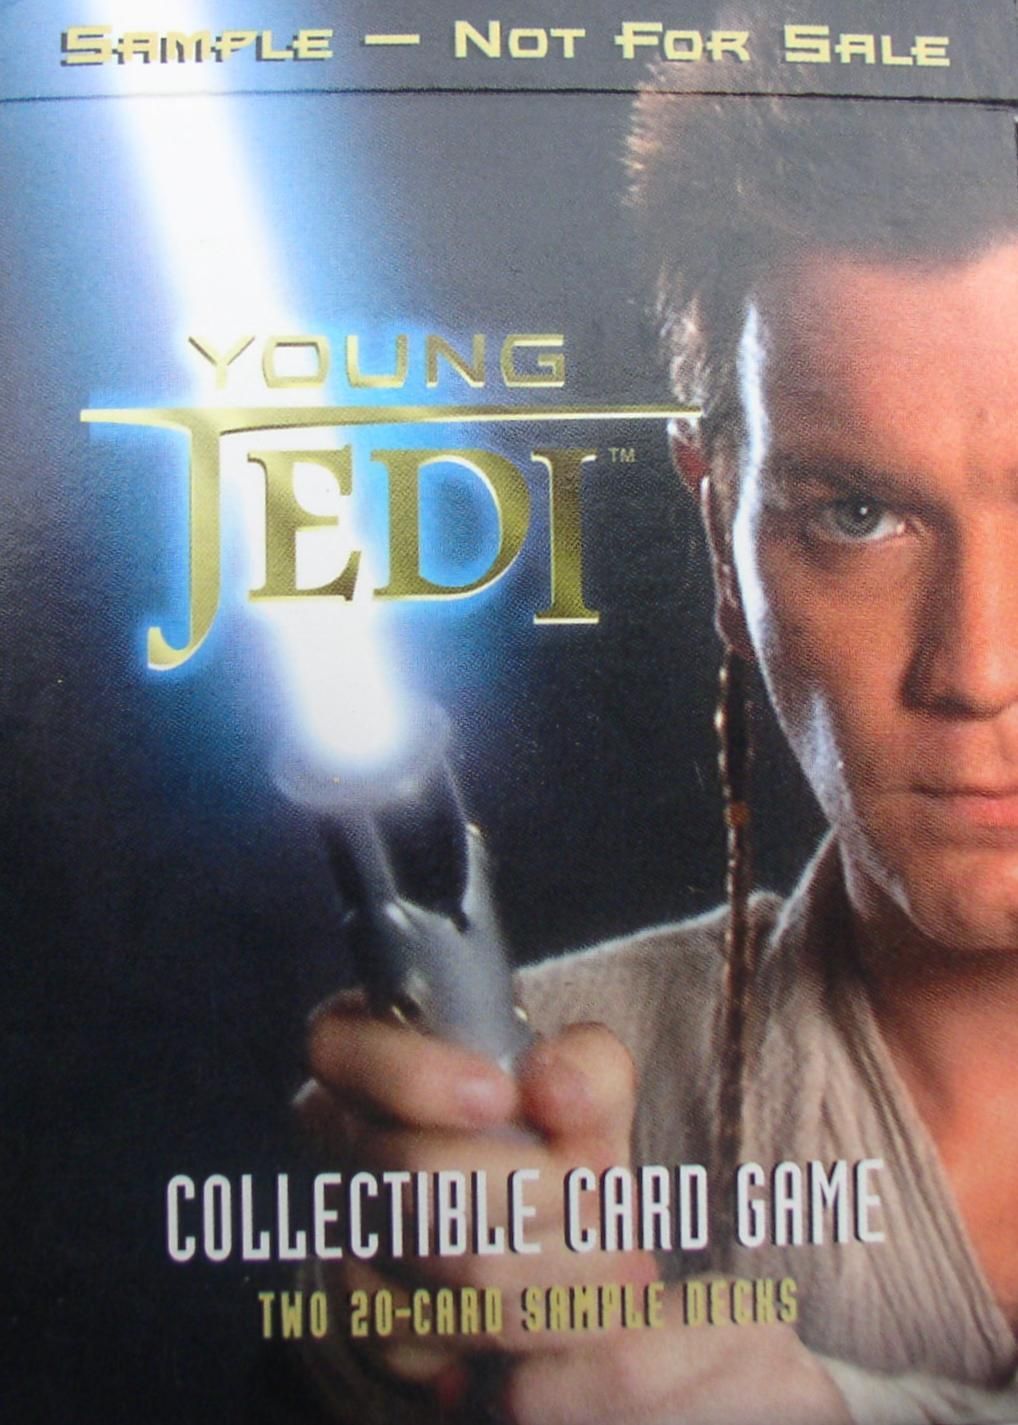 Young Jedi CCG